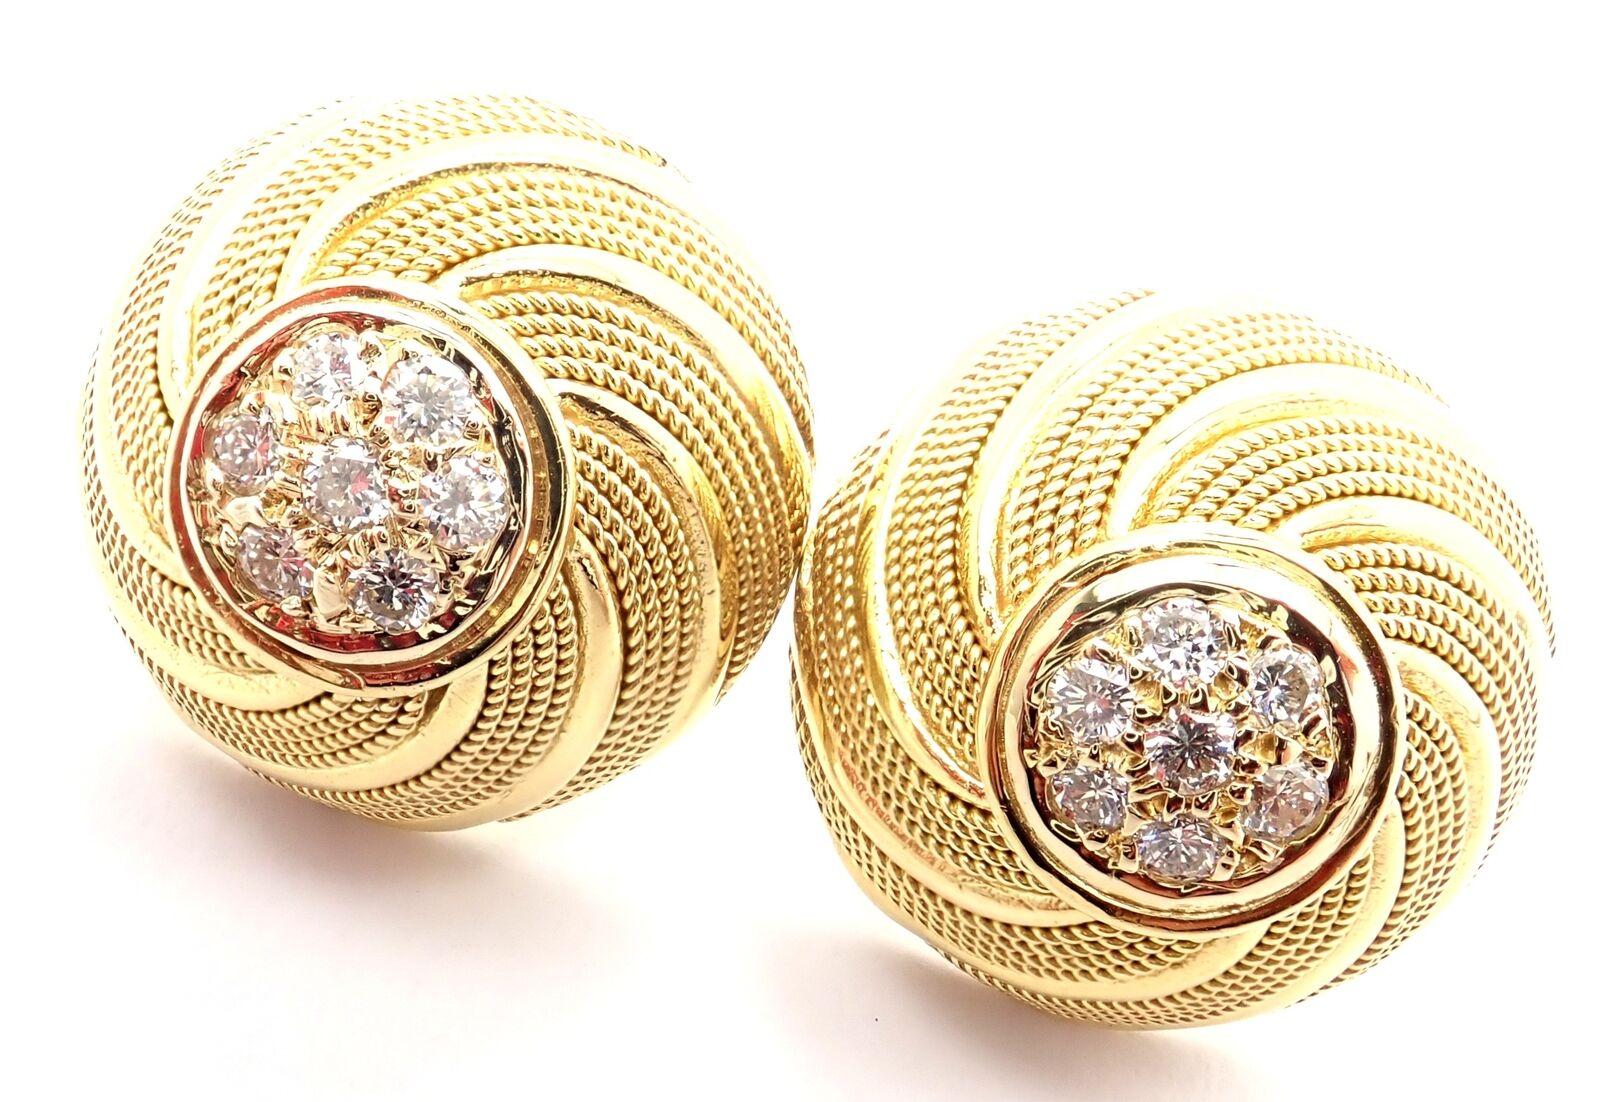 18k Yellow Gold Vintage Diamond Earrings by Tiffany & Co. 
With 14 round brilliant cut diamonds VS1 clarity, G color total weight approximately .50ct 
These earrings are made for pierced ears.
Details: 
Weight: 18.2 grams
Dimensions: 20mm
Stamped